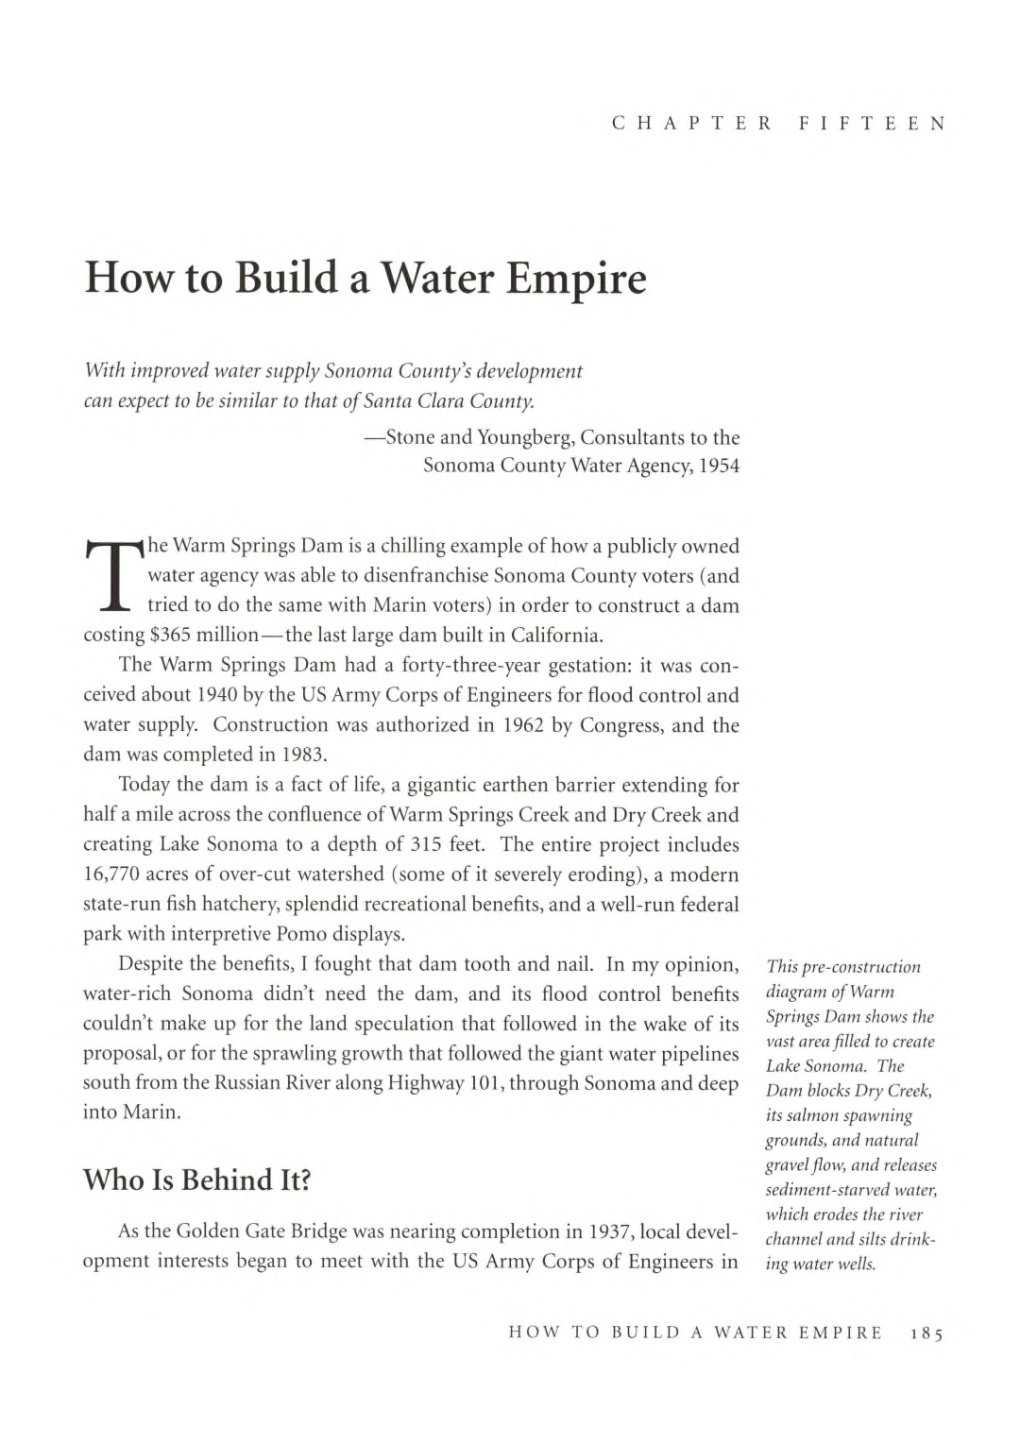 How to Build a Water Empire